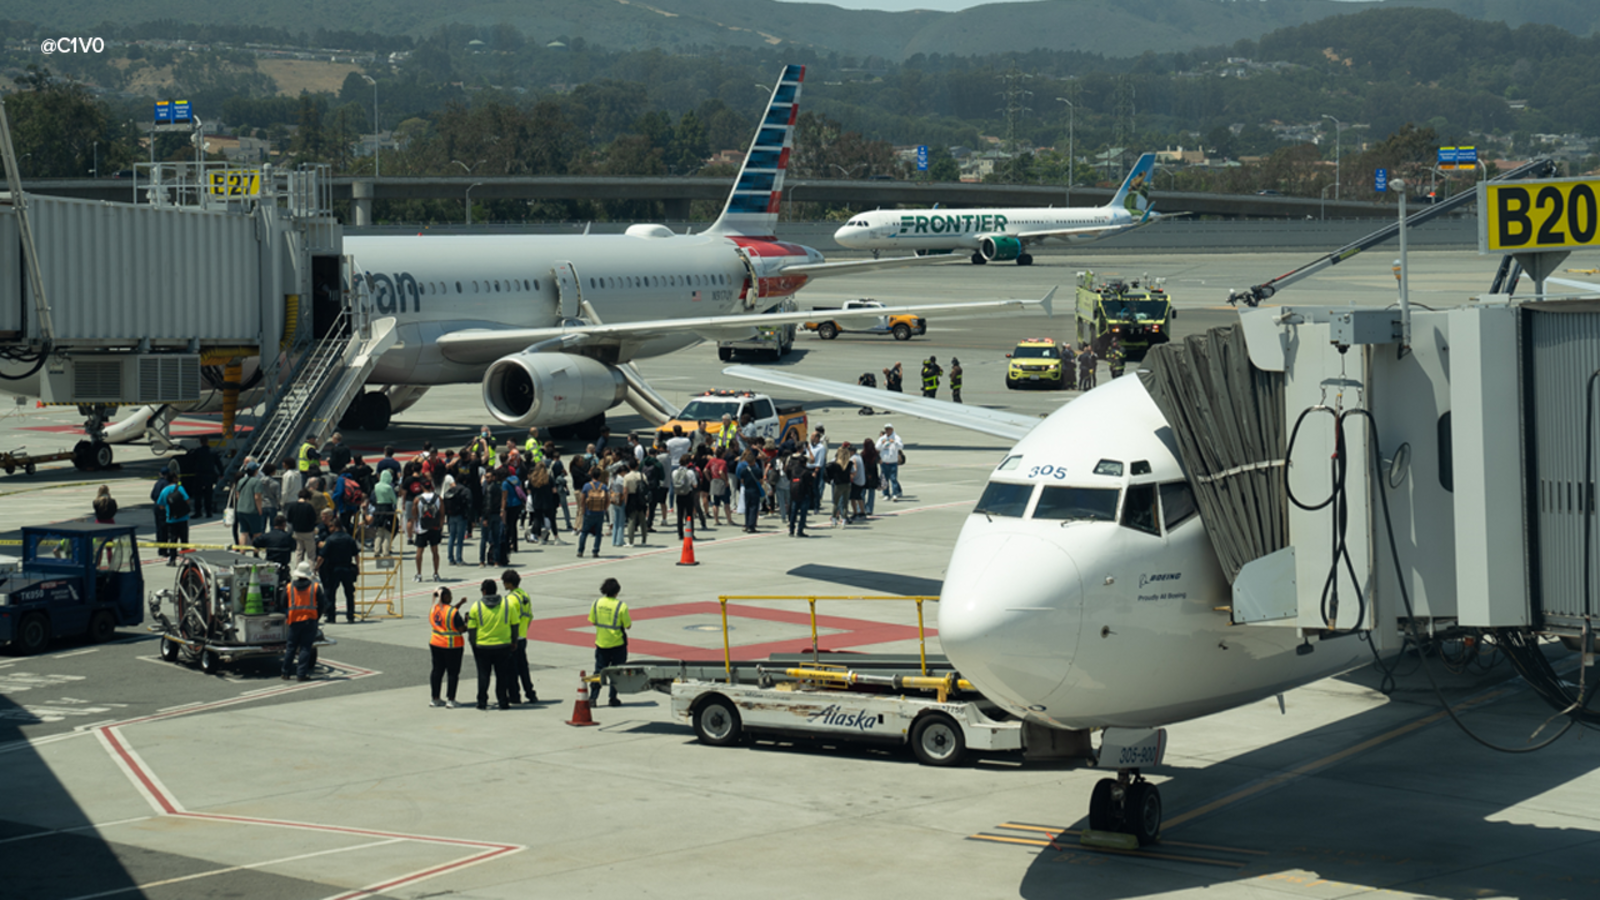 American Airlines flight evacuated via emergency slides after smoke reported during taxiing at San Francisco airport; 3 injured [Video]